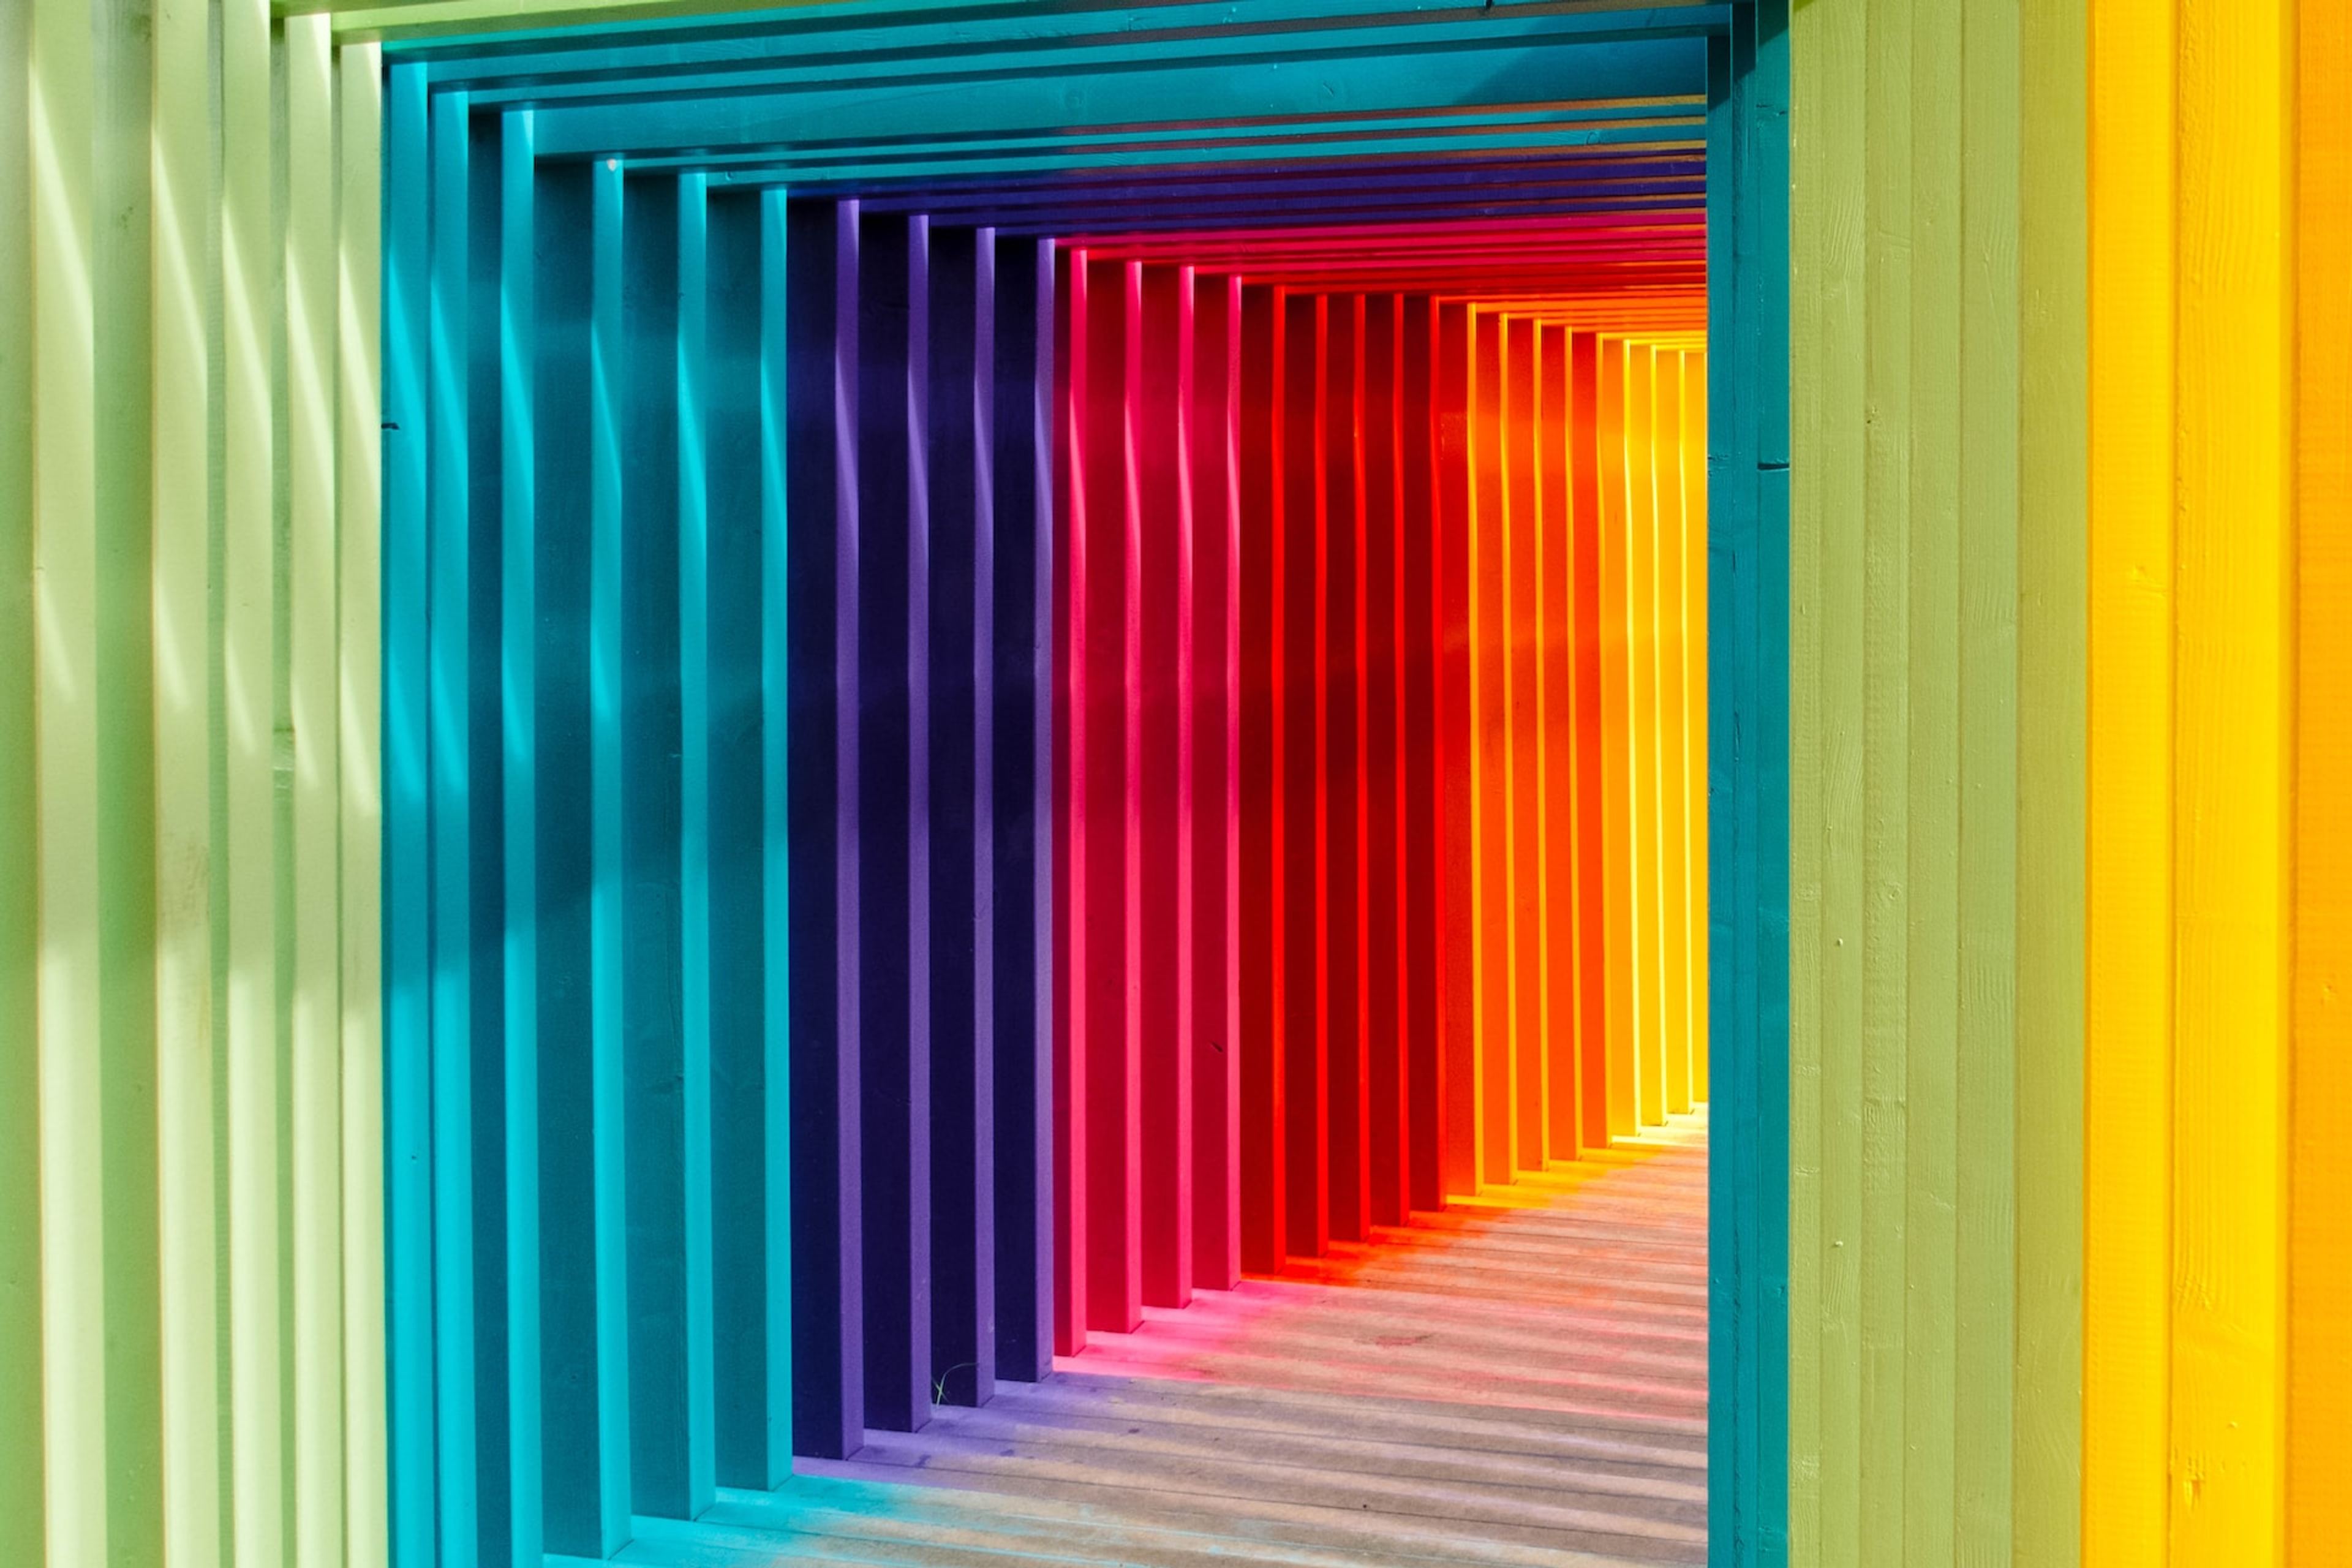 hallway of wood in rainbow colors with sunlight shining in between the planks